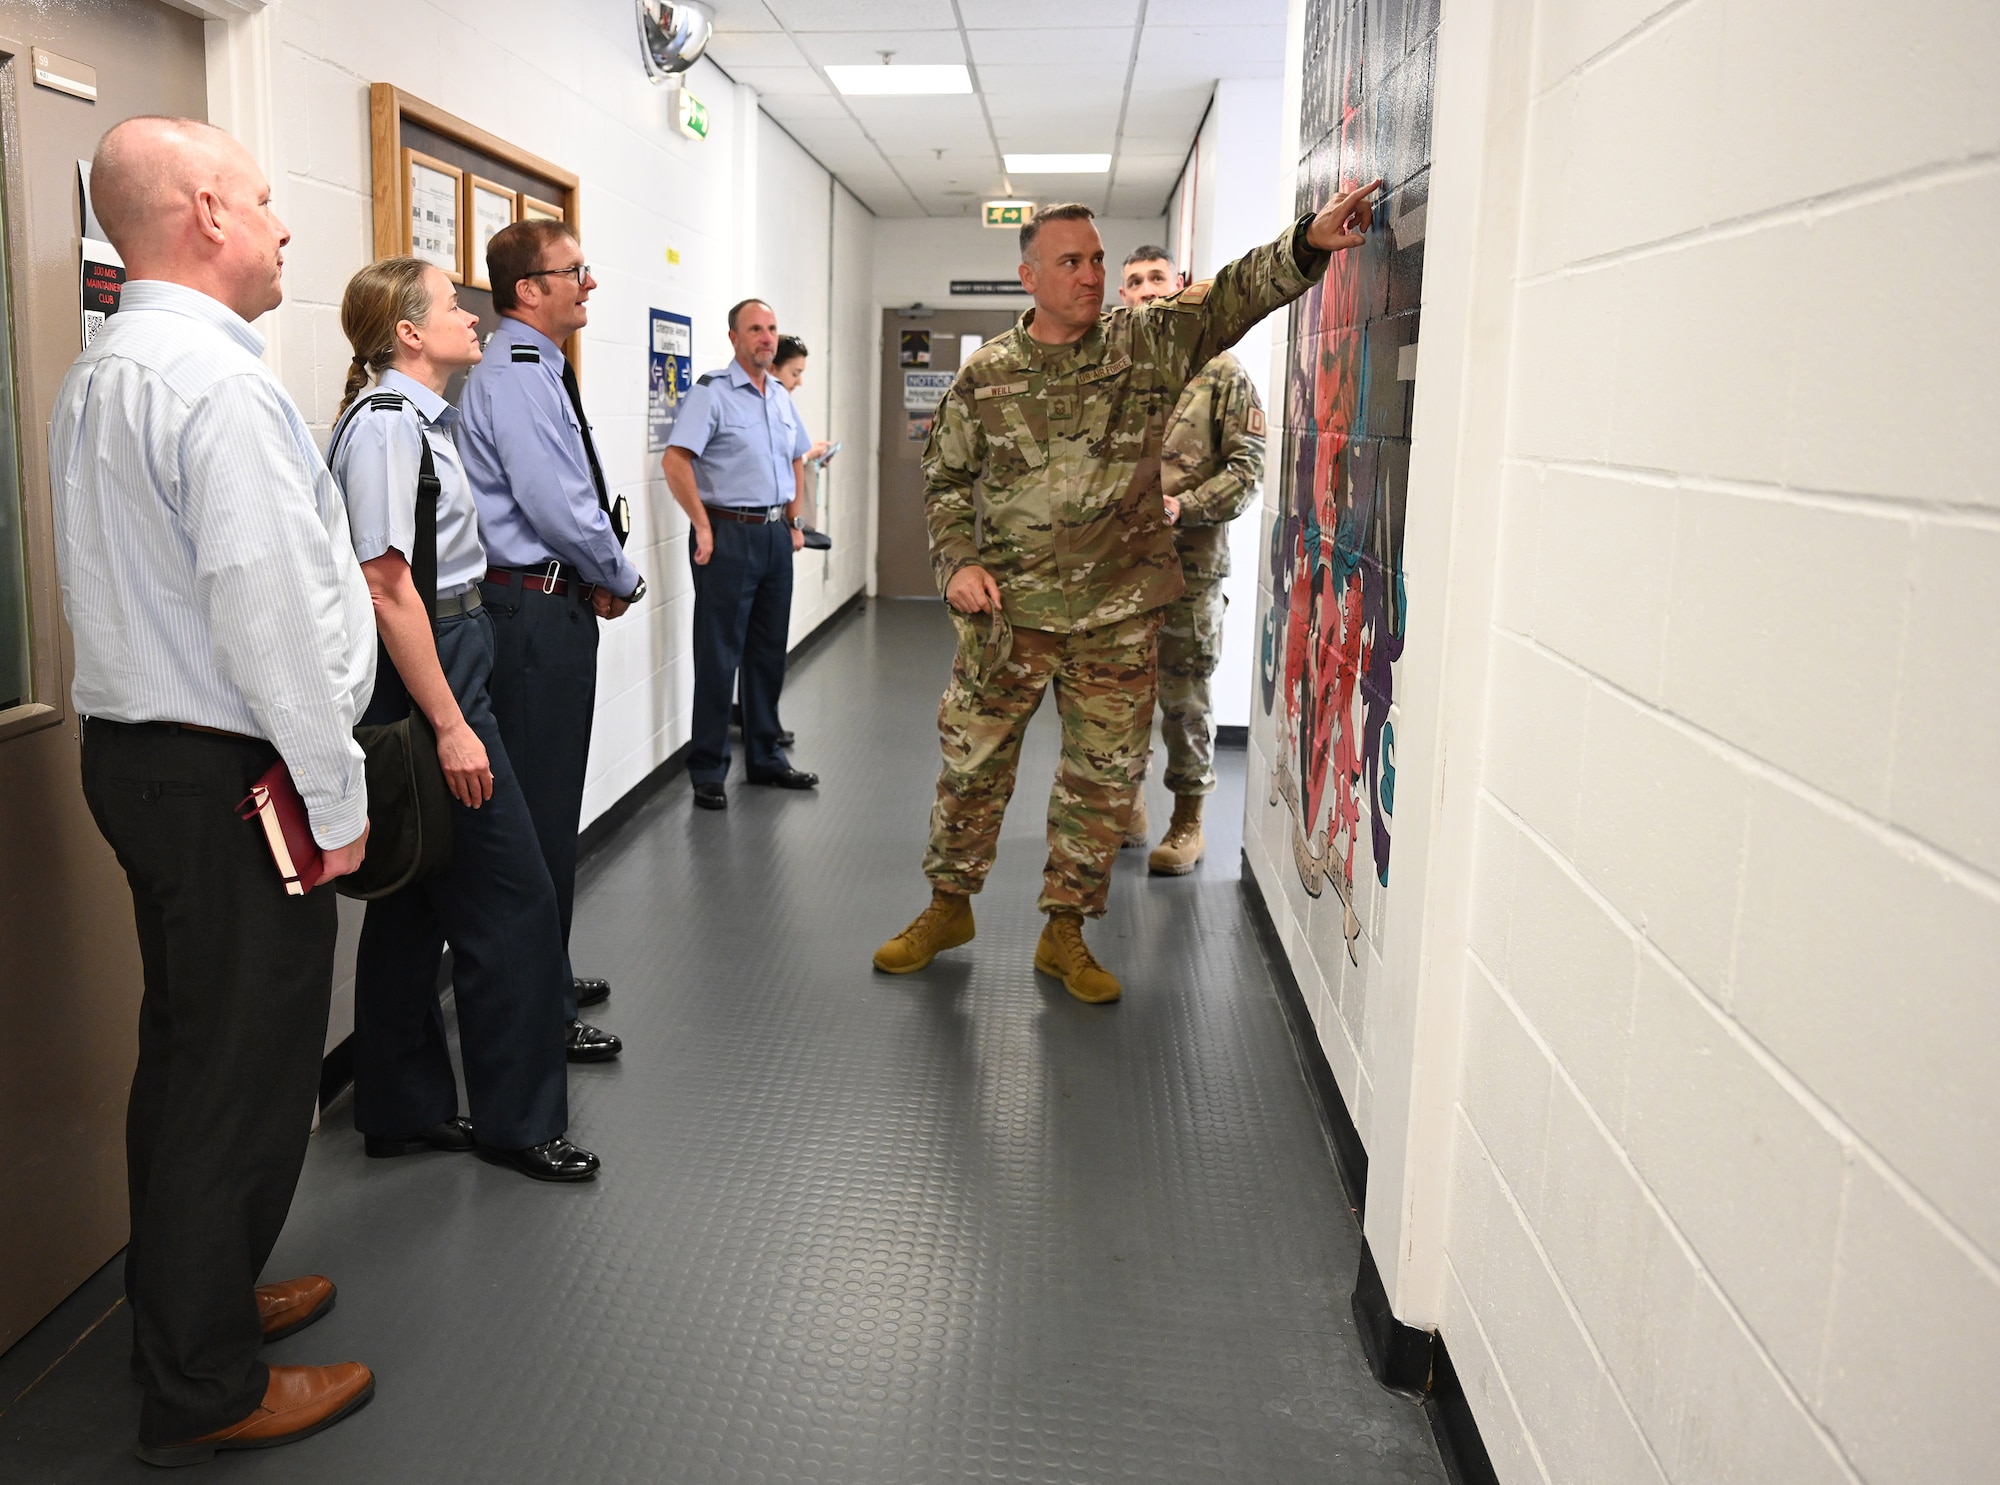 U.S. Air Force Chief Master Sgt. Jason Weill, right, 100th Maintenance Group senior enlisted leader, shows off a mural – painted by 100th MXG Airmen – to Air Commodore Simon Strasdin, third left, Royal Air Force Intelligence, Surveillance, Target Acquisition and Reconnaissance force commander, based at RAF Waddington, and Wing Commander Sal Berris, second left, ISTAR SO1 Rivet Joint Program, during a visit to RAF Mildenhall, England, Aug. 23, 2023. Strasdin was here to strengthen United Kingdom-US relationships and thank 100th ARW, 95th Reconnaissance Squadron and 488th Intelligence Squadron Airmen for their hard work and cooperation in the joint partnership program between the RAF and U.S. Air Force reconnaissance aircraft. (U.S. Air Force photo by Karen Abeyasekere)